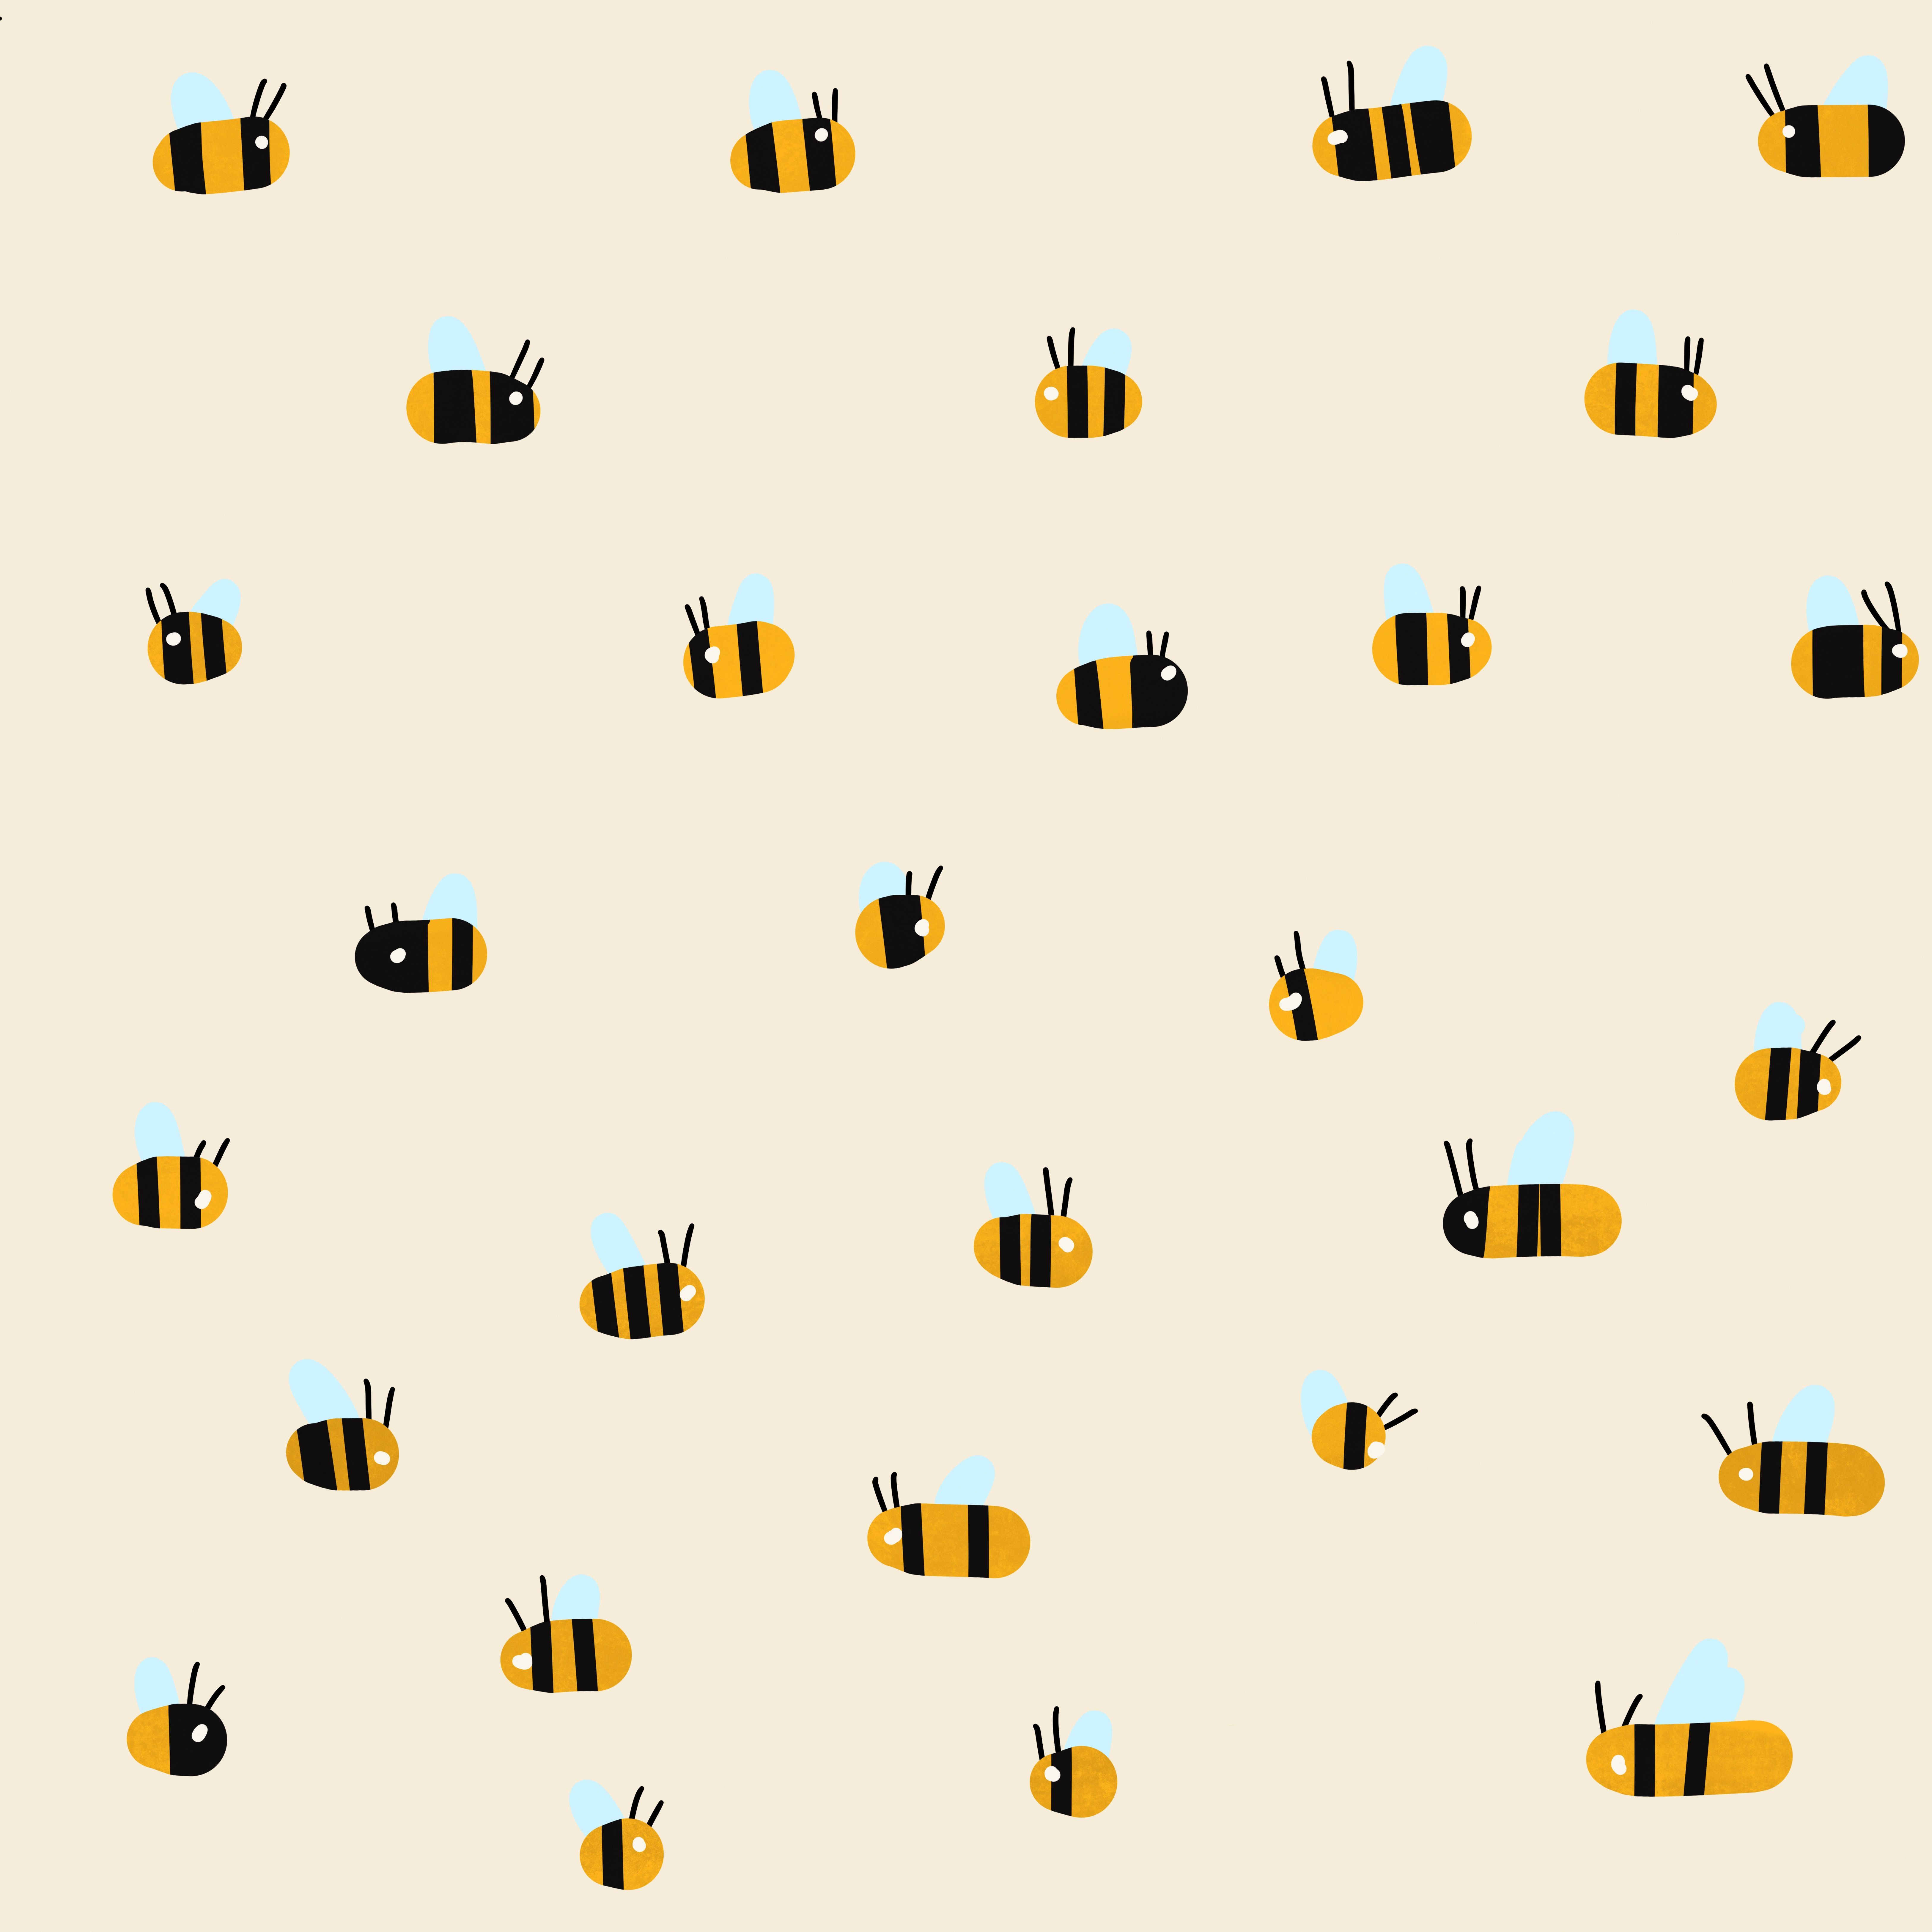 Aesthetic Bees Wallpapers  Wallpaper Cave